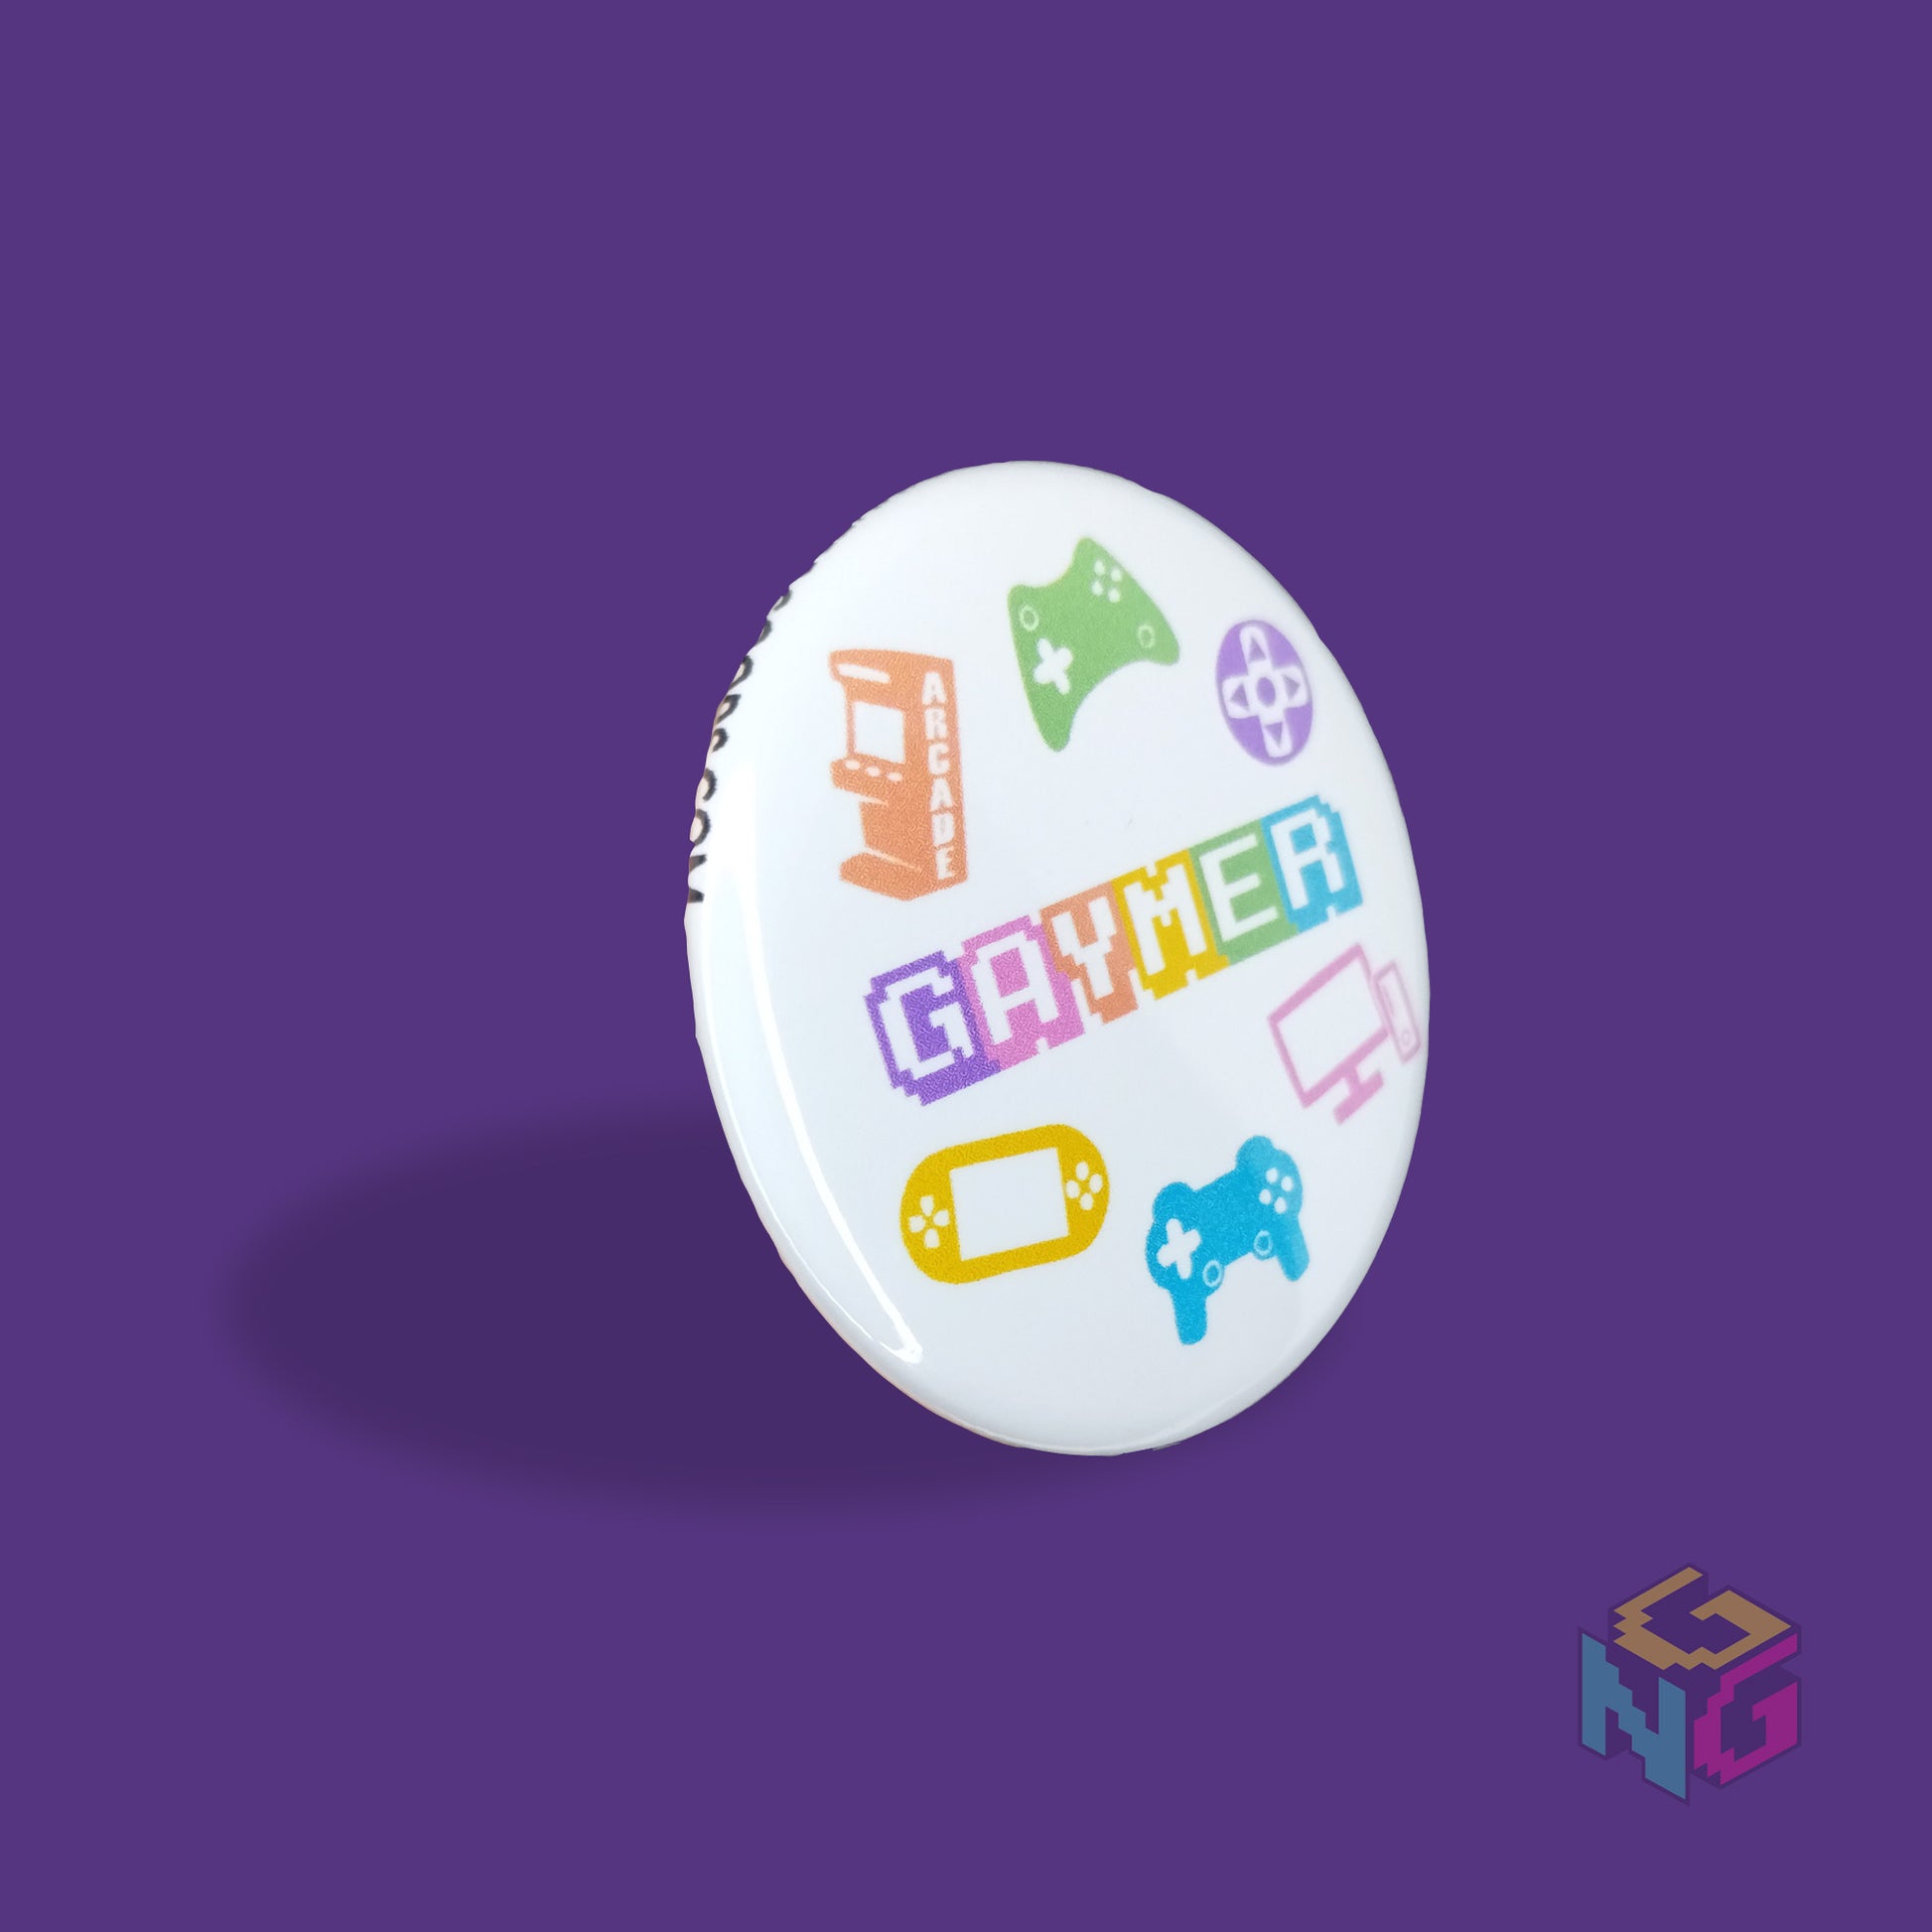 round rainbow gaymer button facing to the right on a purple background